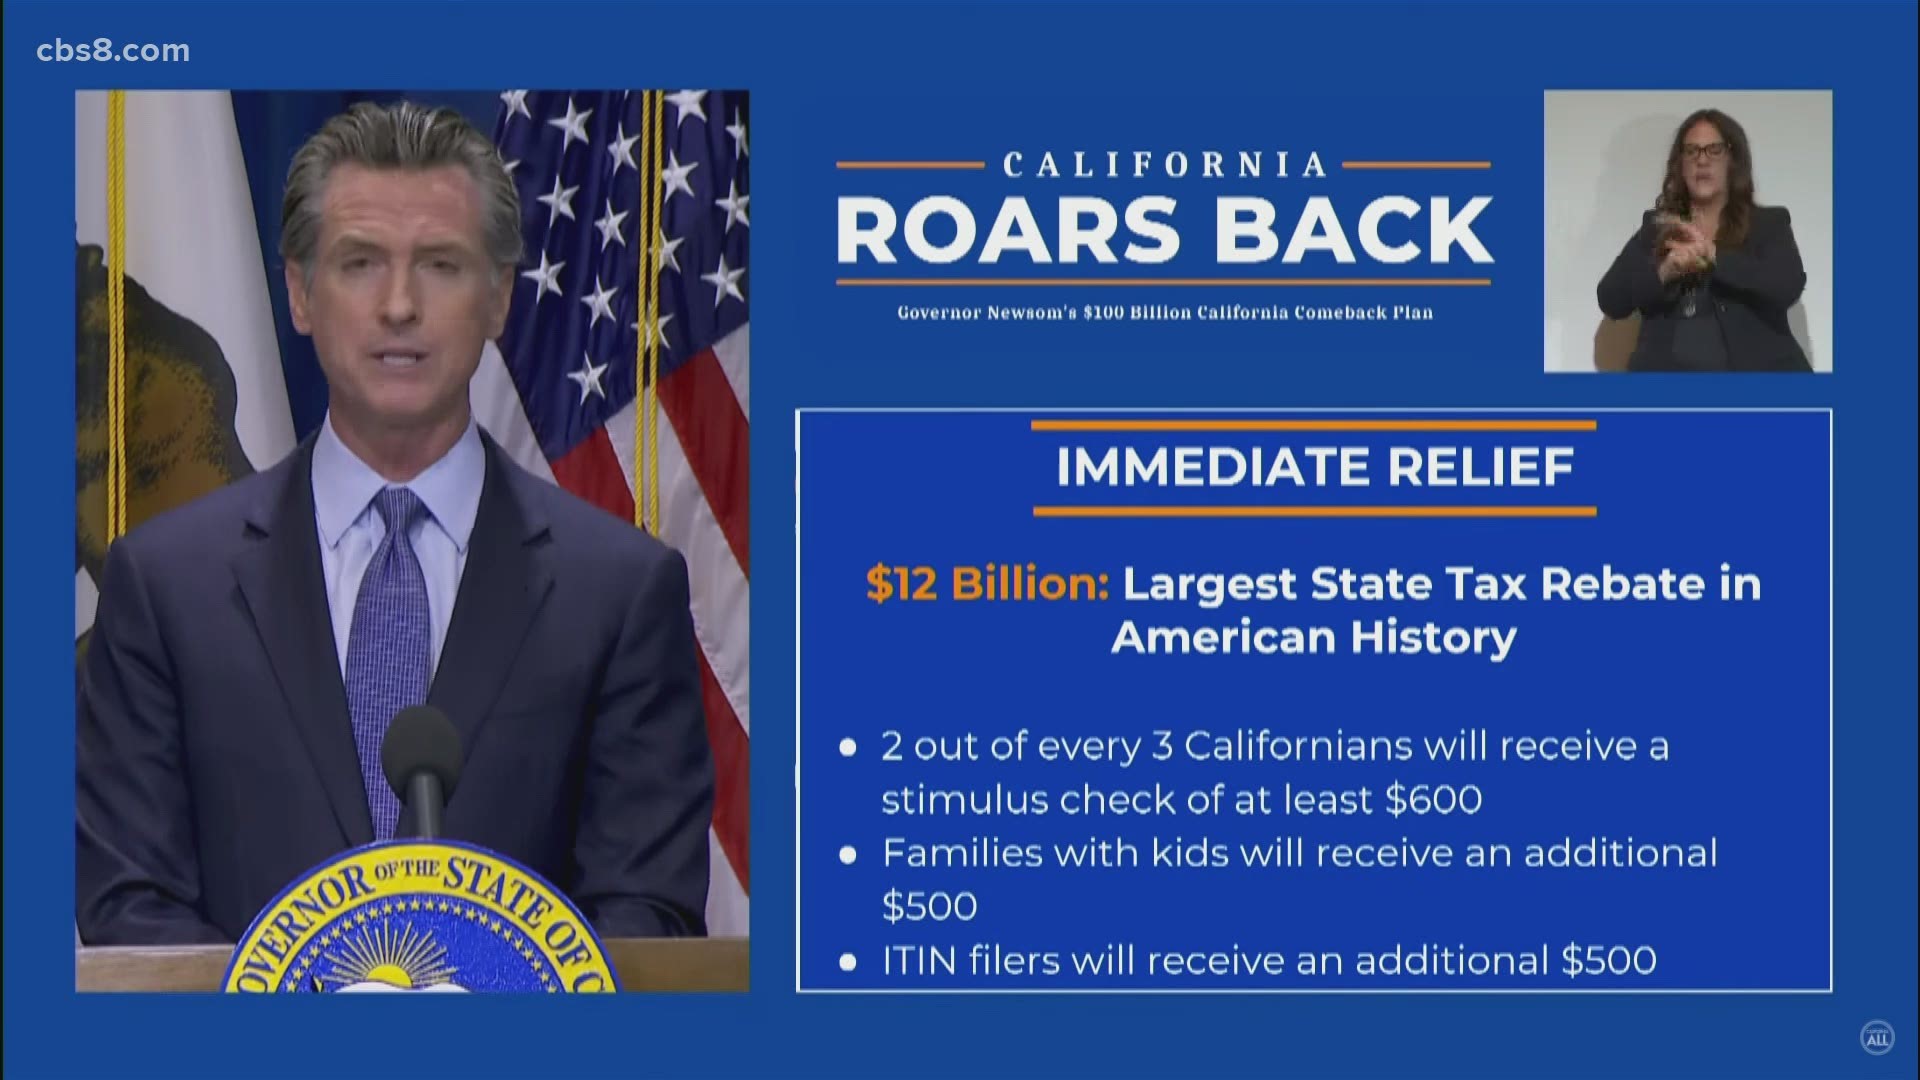 The Immediate Relief Package contains direct payments to Californians as well as rental assistance.